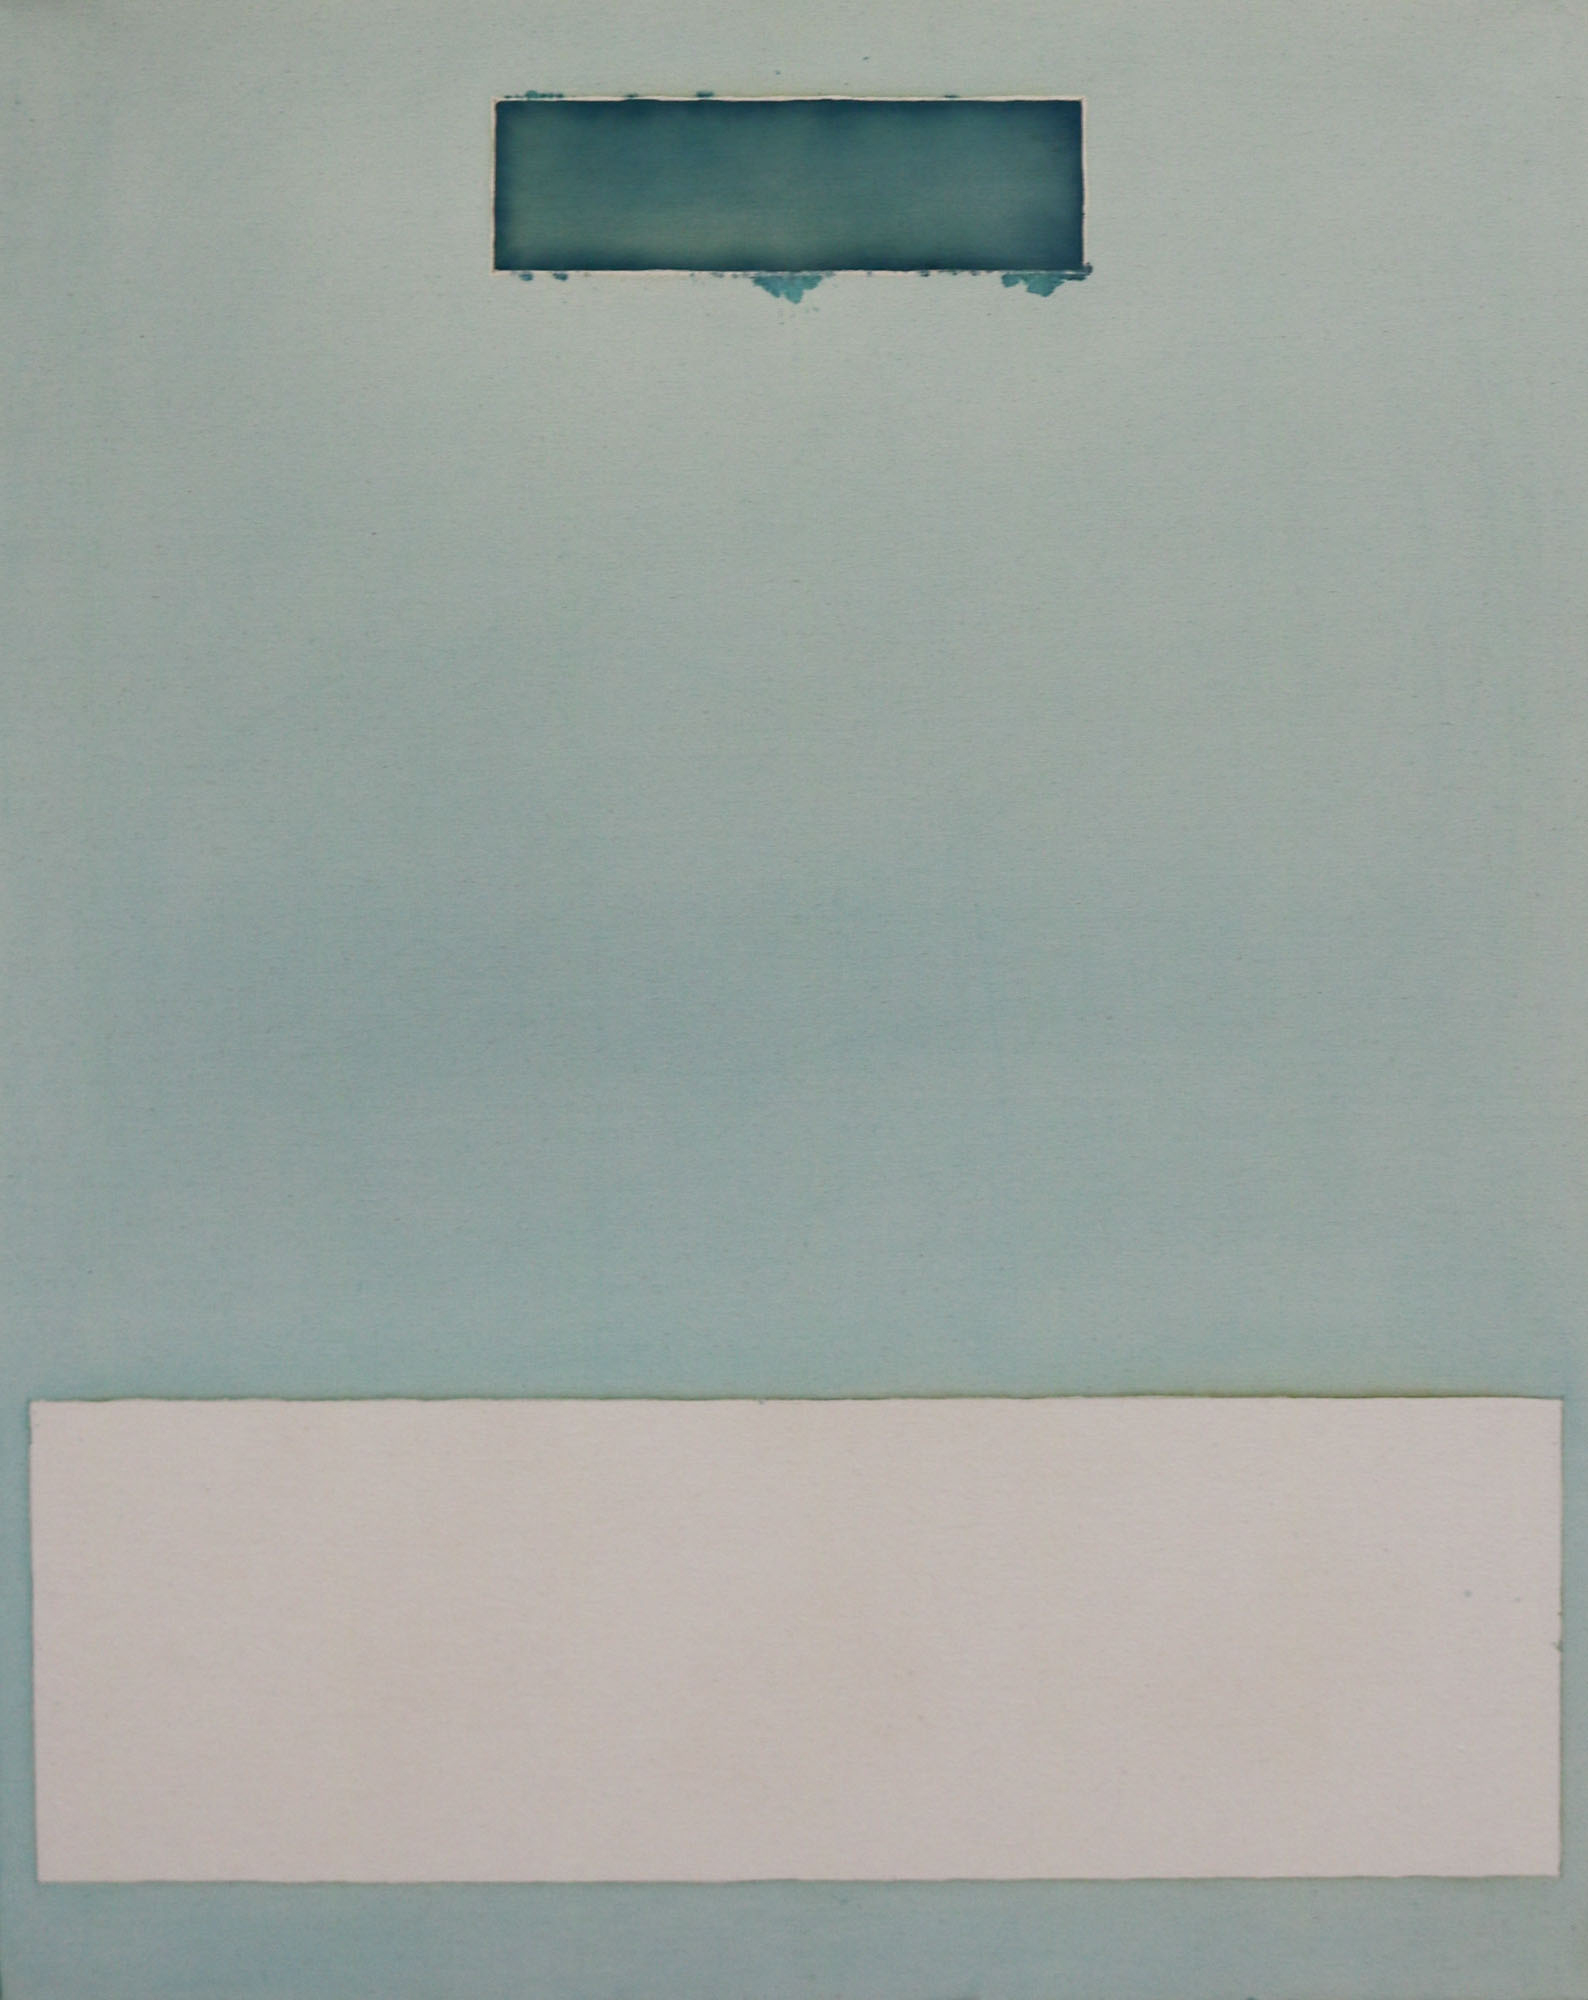 Photo of painting of two rectangles in different tones of green